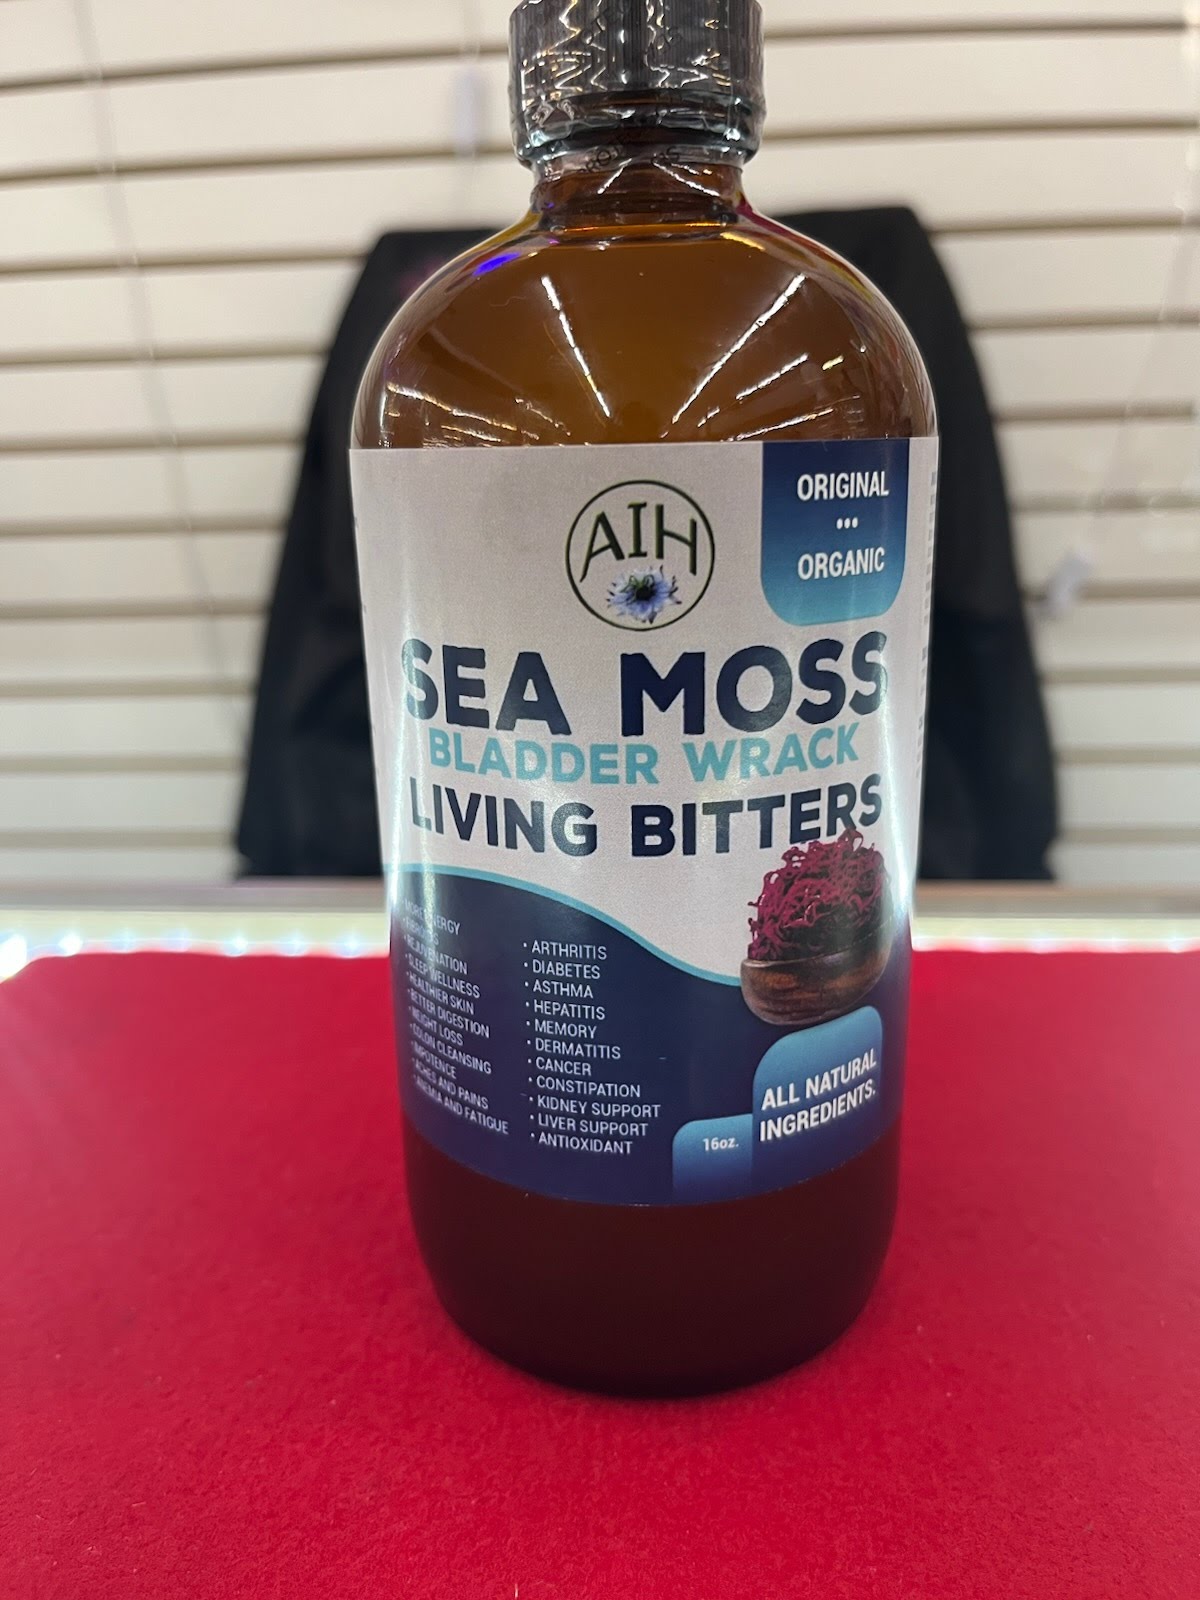 A bottle of sea moss is sitting on the table.